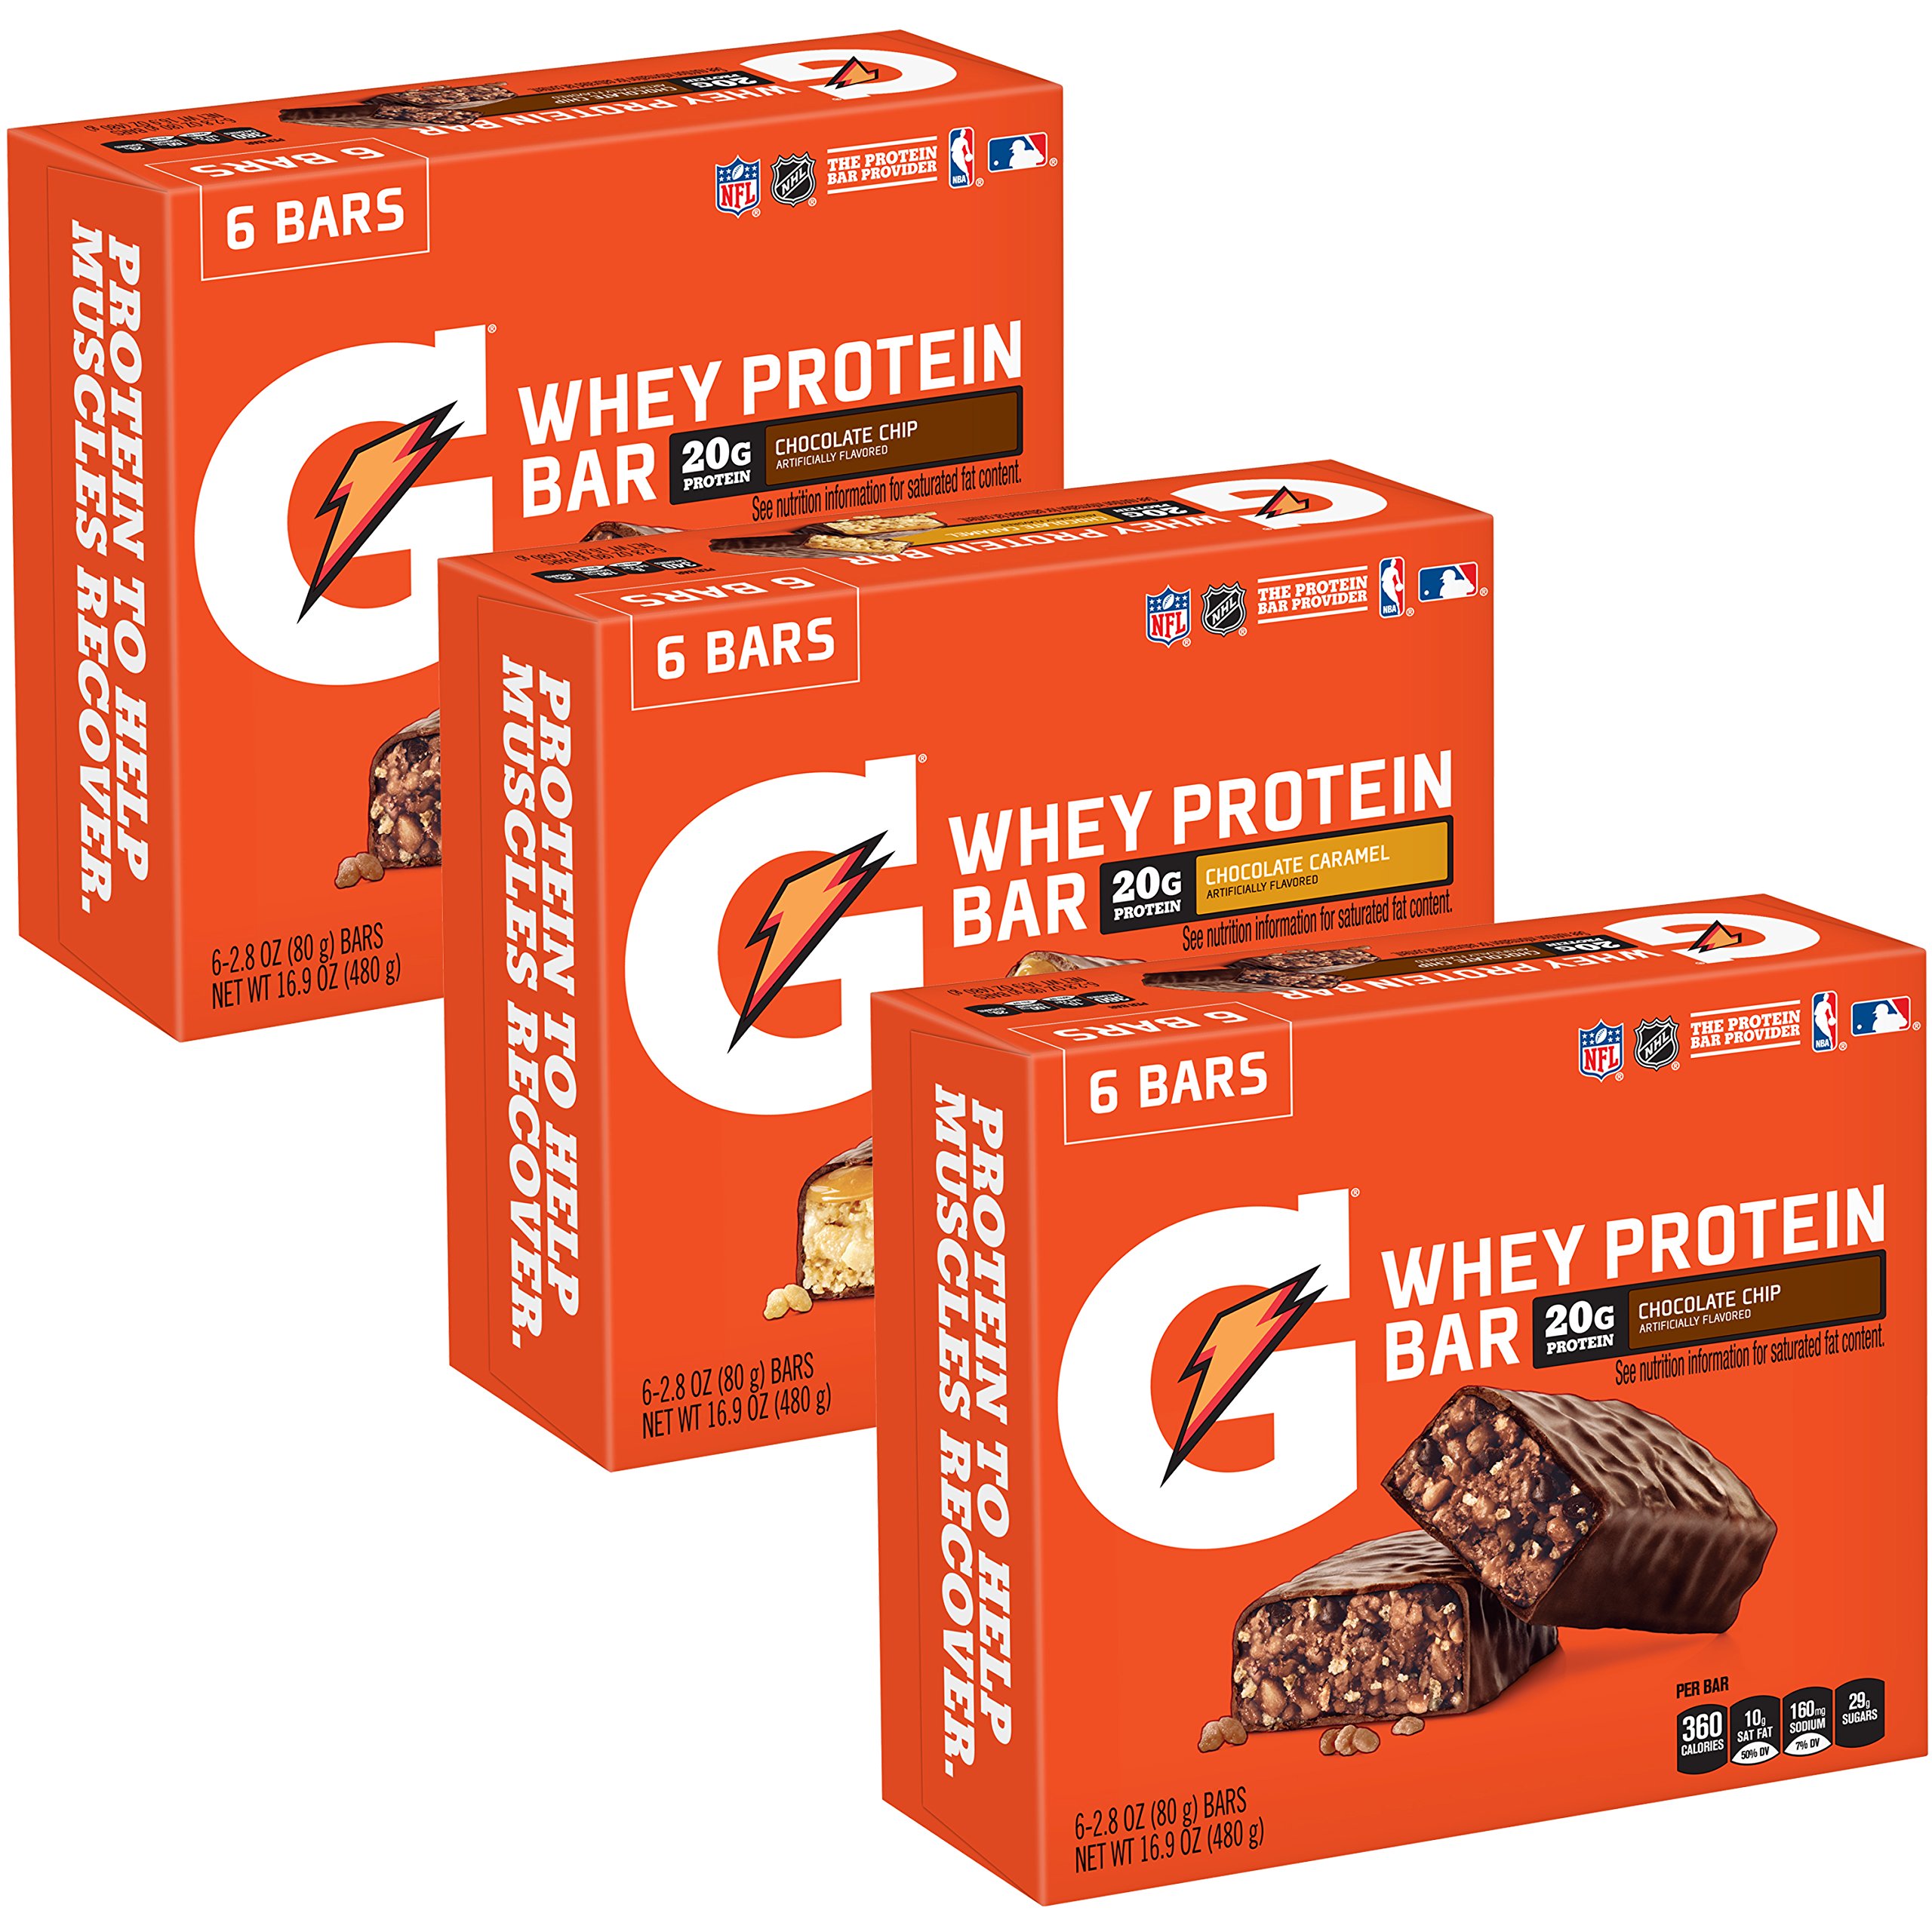 Gatorade Whey Protein Bars, Variety Pack, 2.8 oz bars (Pack of 18) & Whey Protein Recover Bars, Chocolate Chip, 2.8 ounce bars (12 Count)